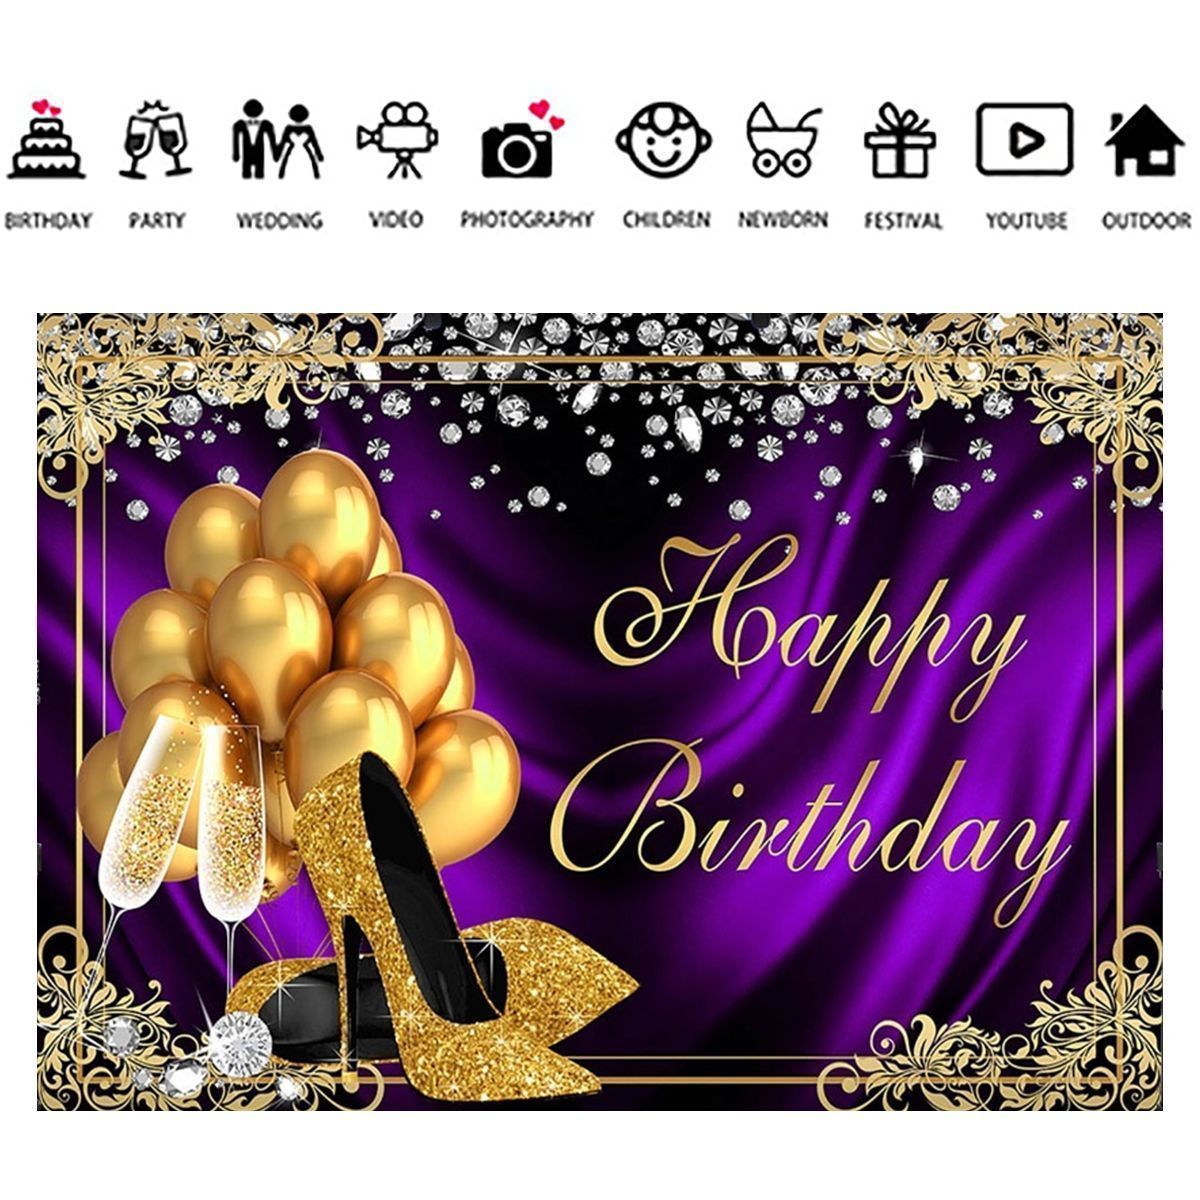 Glitter-Adult-Birthday-Party-Background-Photography-Cloth-Balloon-High-Heels-Diamond-Background-Phot-1759428